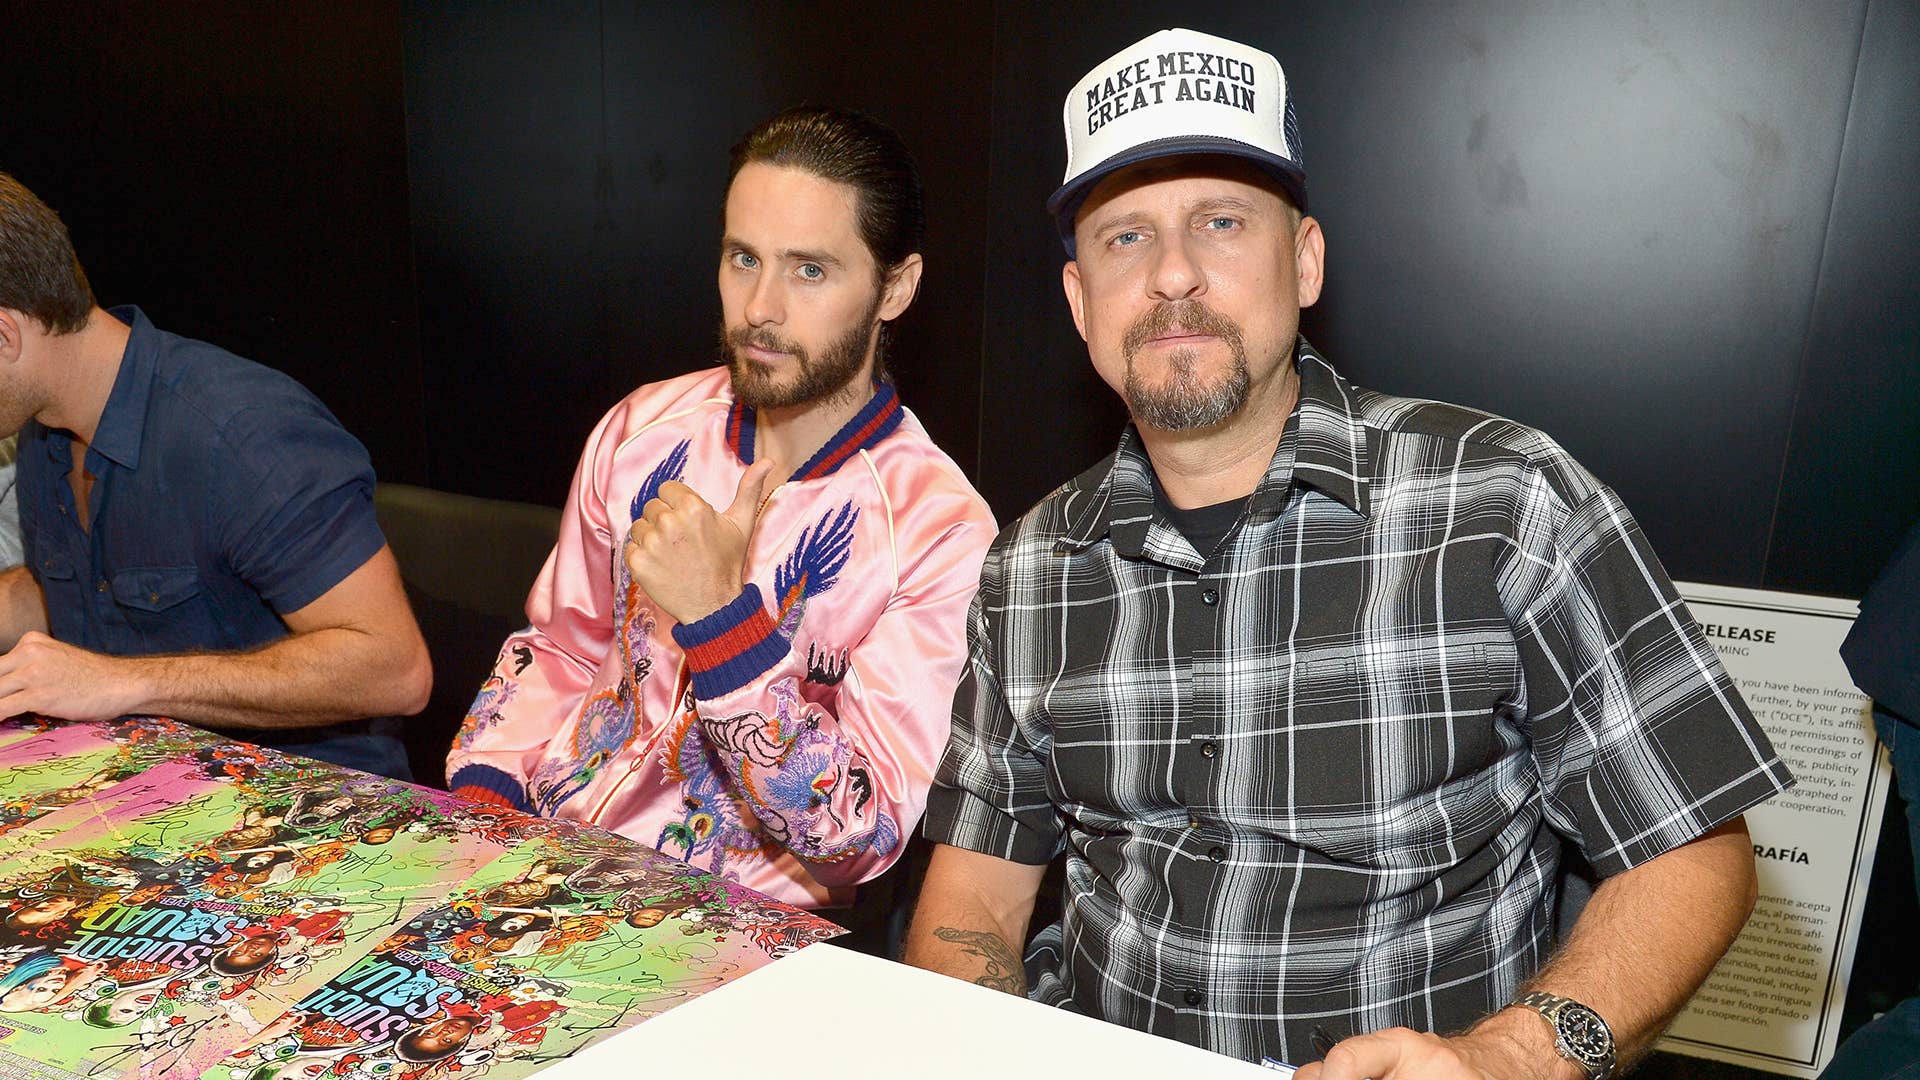 Jared Leto and David Ayer at a signing for 'Suicide Squad' at Comic-Con 2016.